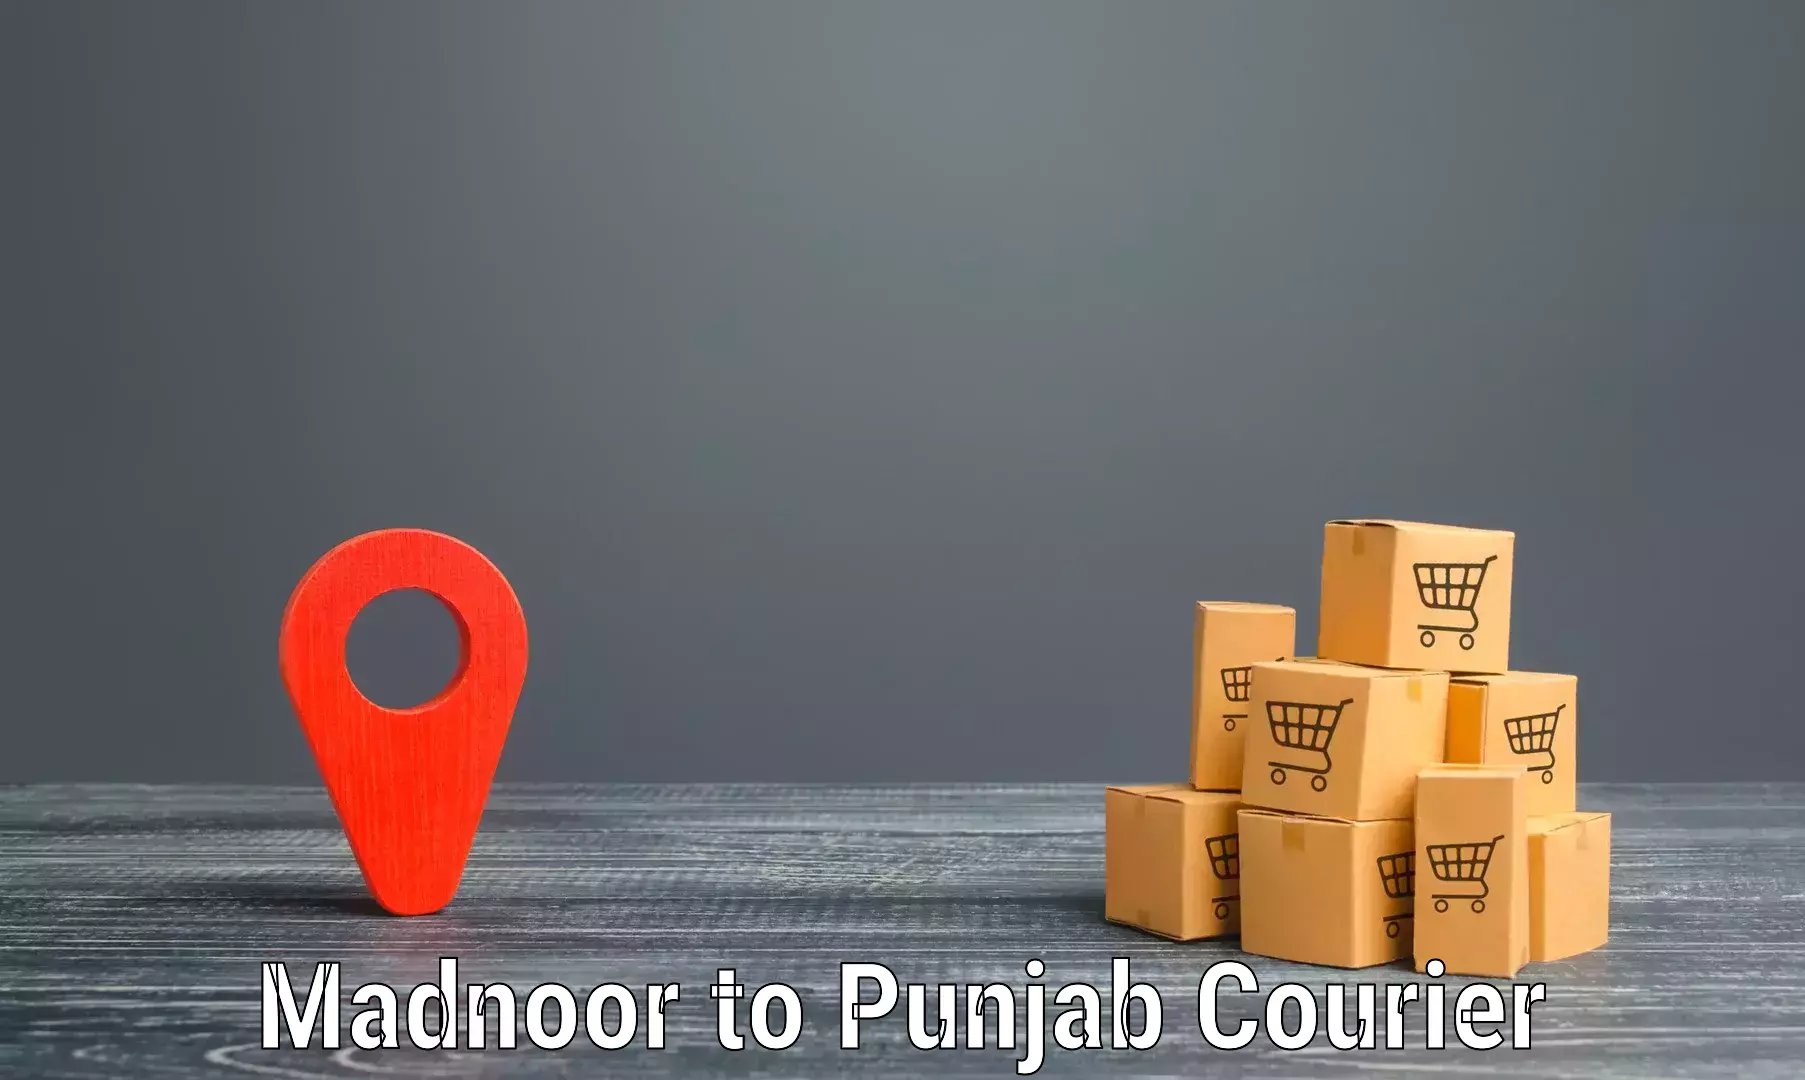 Flexible delivery scheduling Madnoor to Punjab